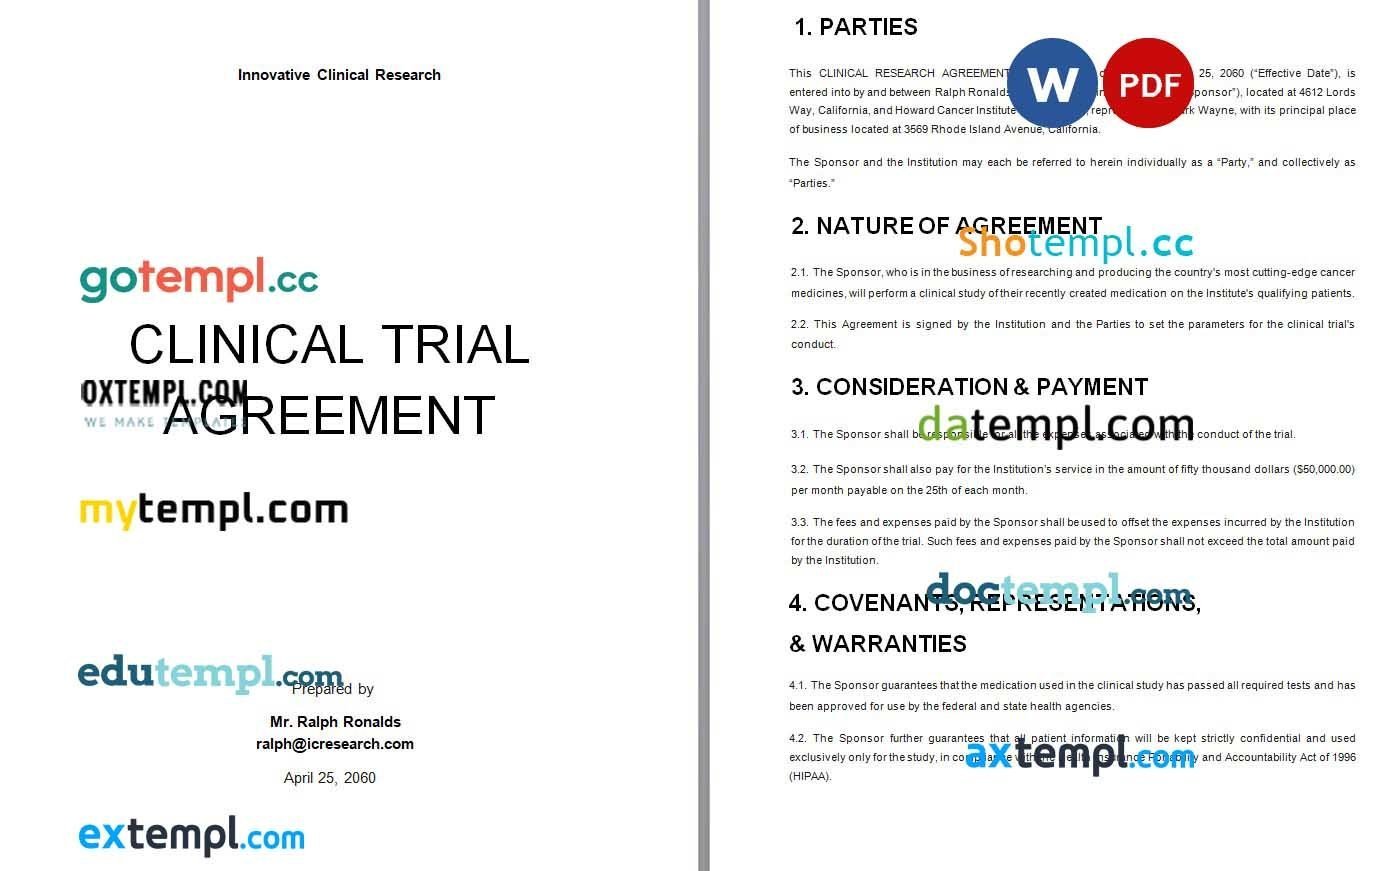 Copy of Clinical Trial Agreement Word example, fully editable